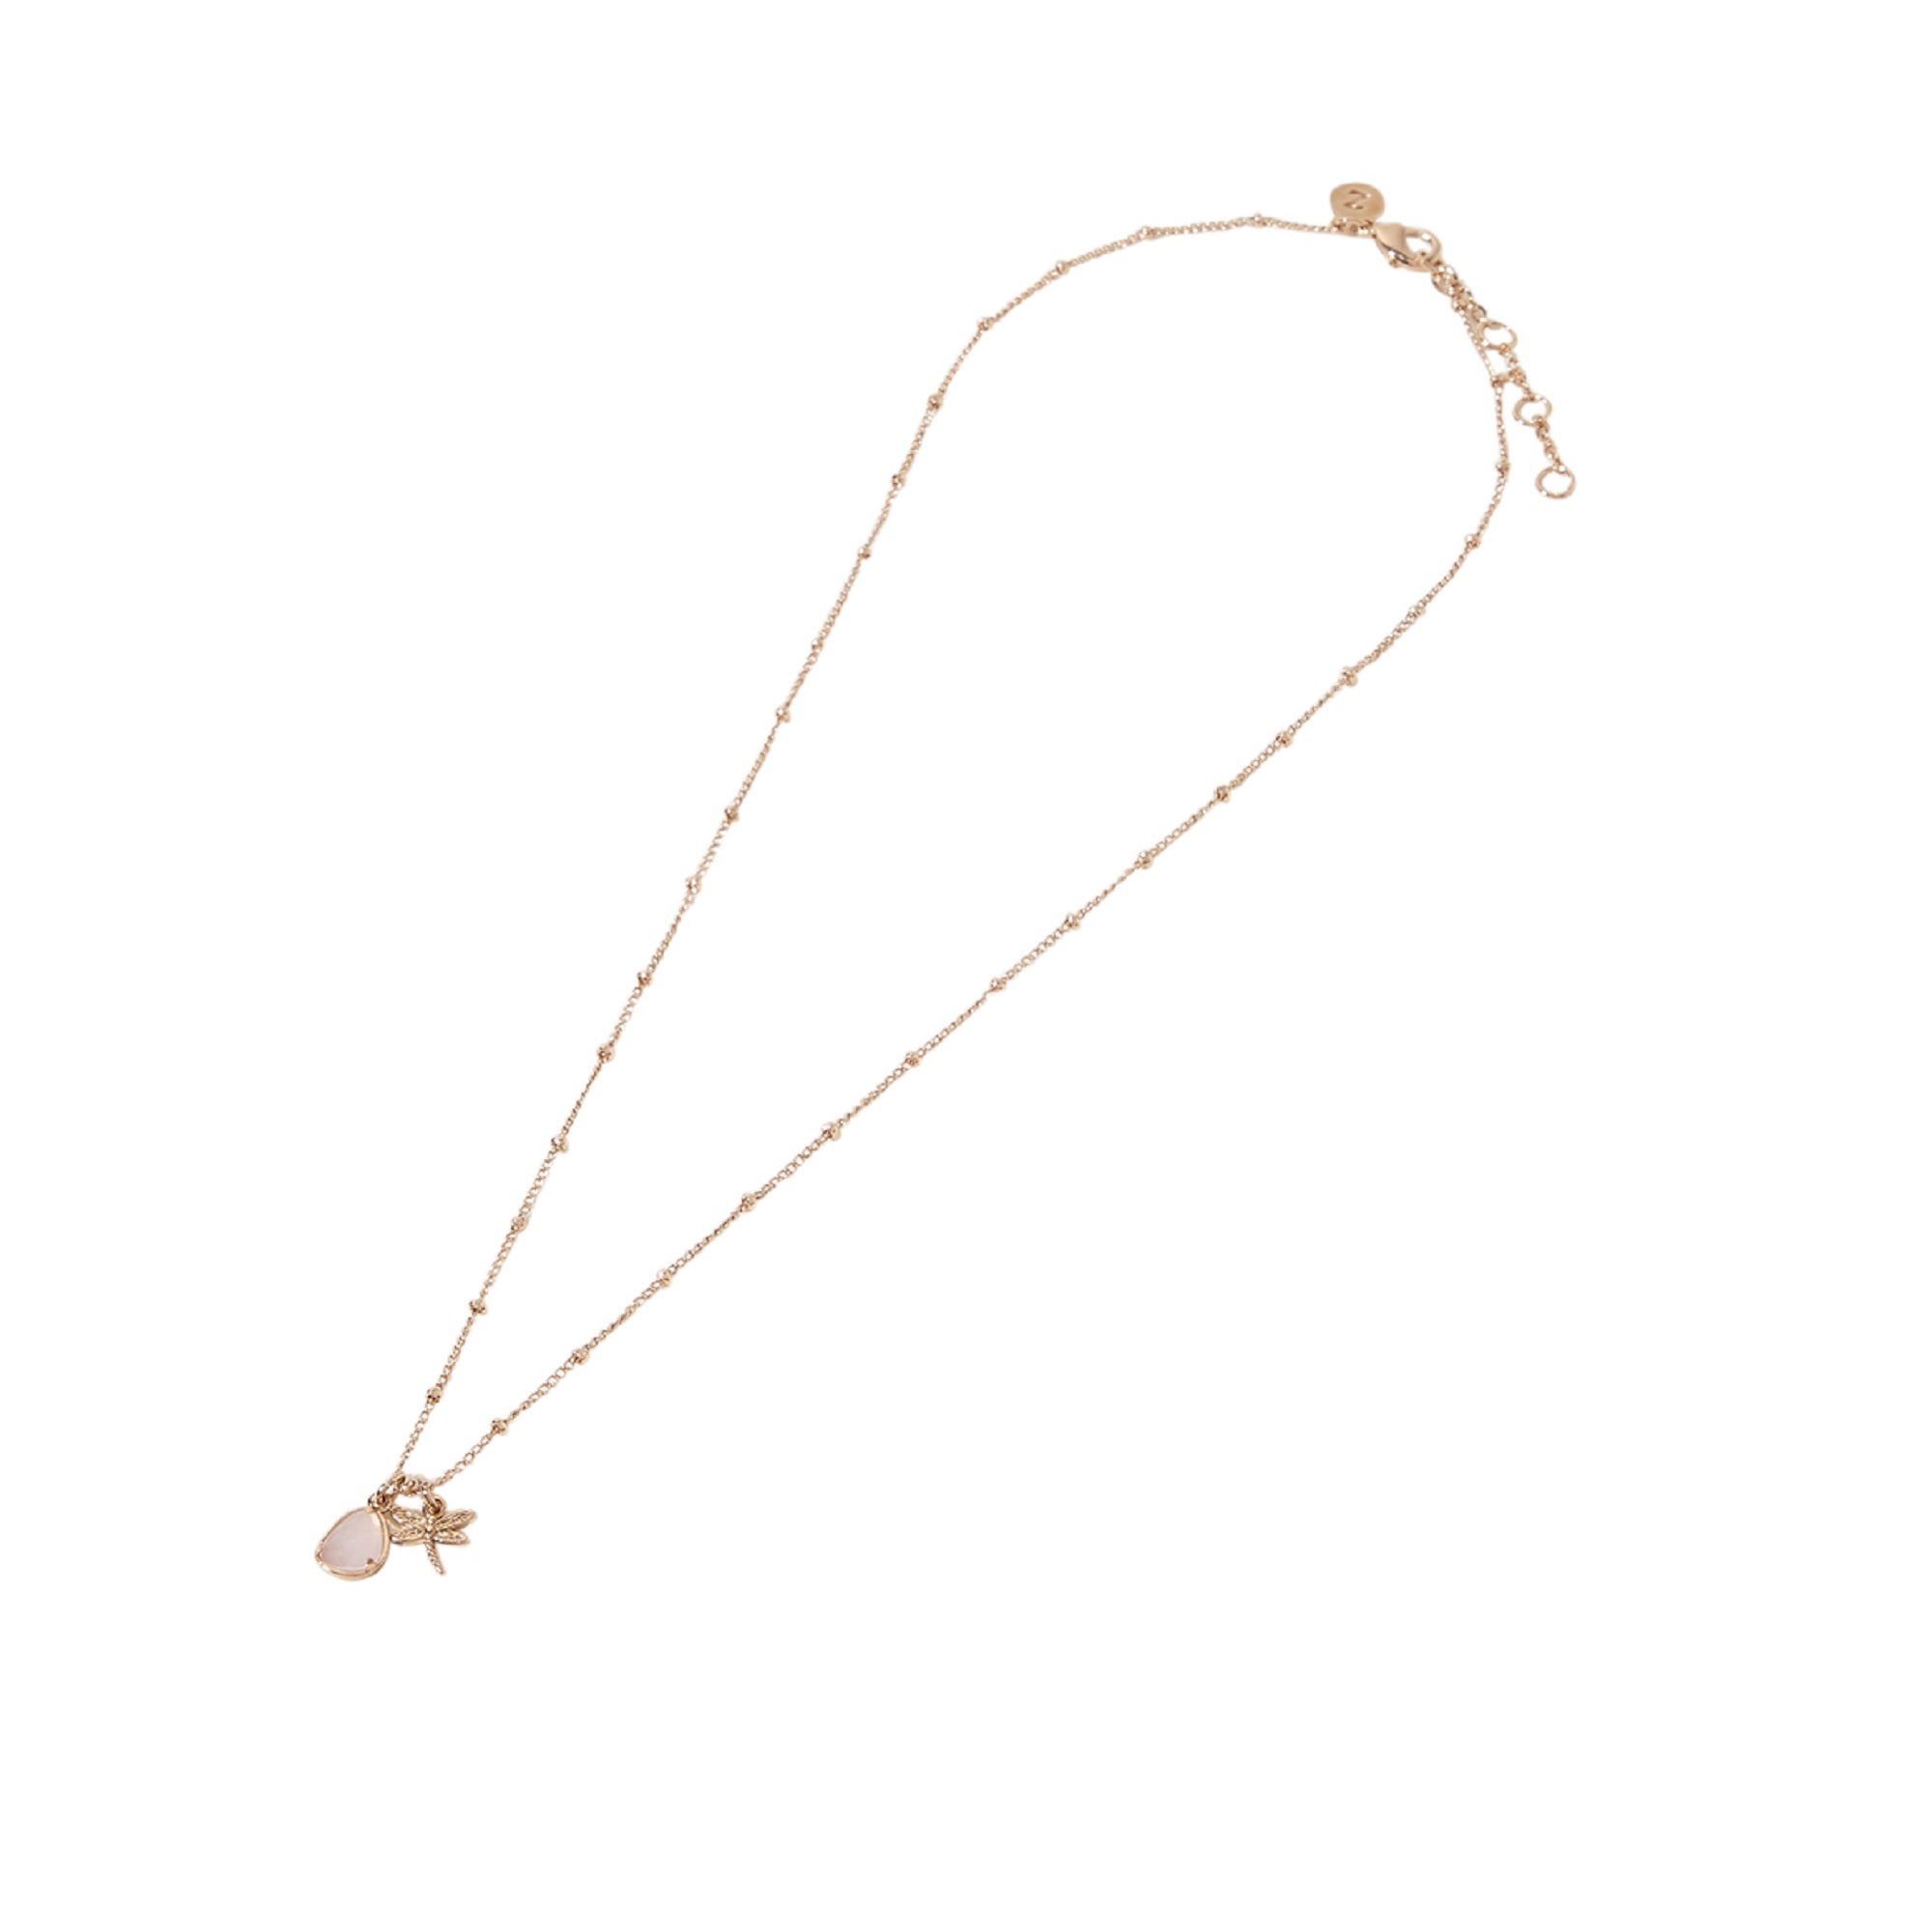 Ladies Necklace | Buy Necklaces for Women Online - Accessorize India